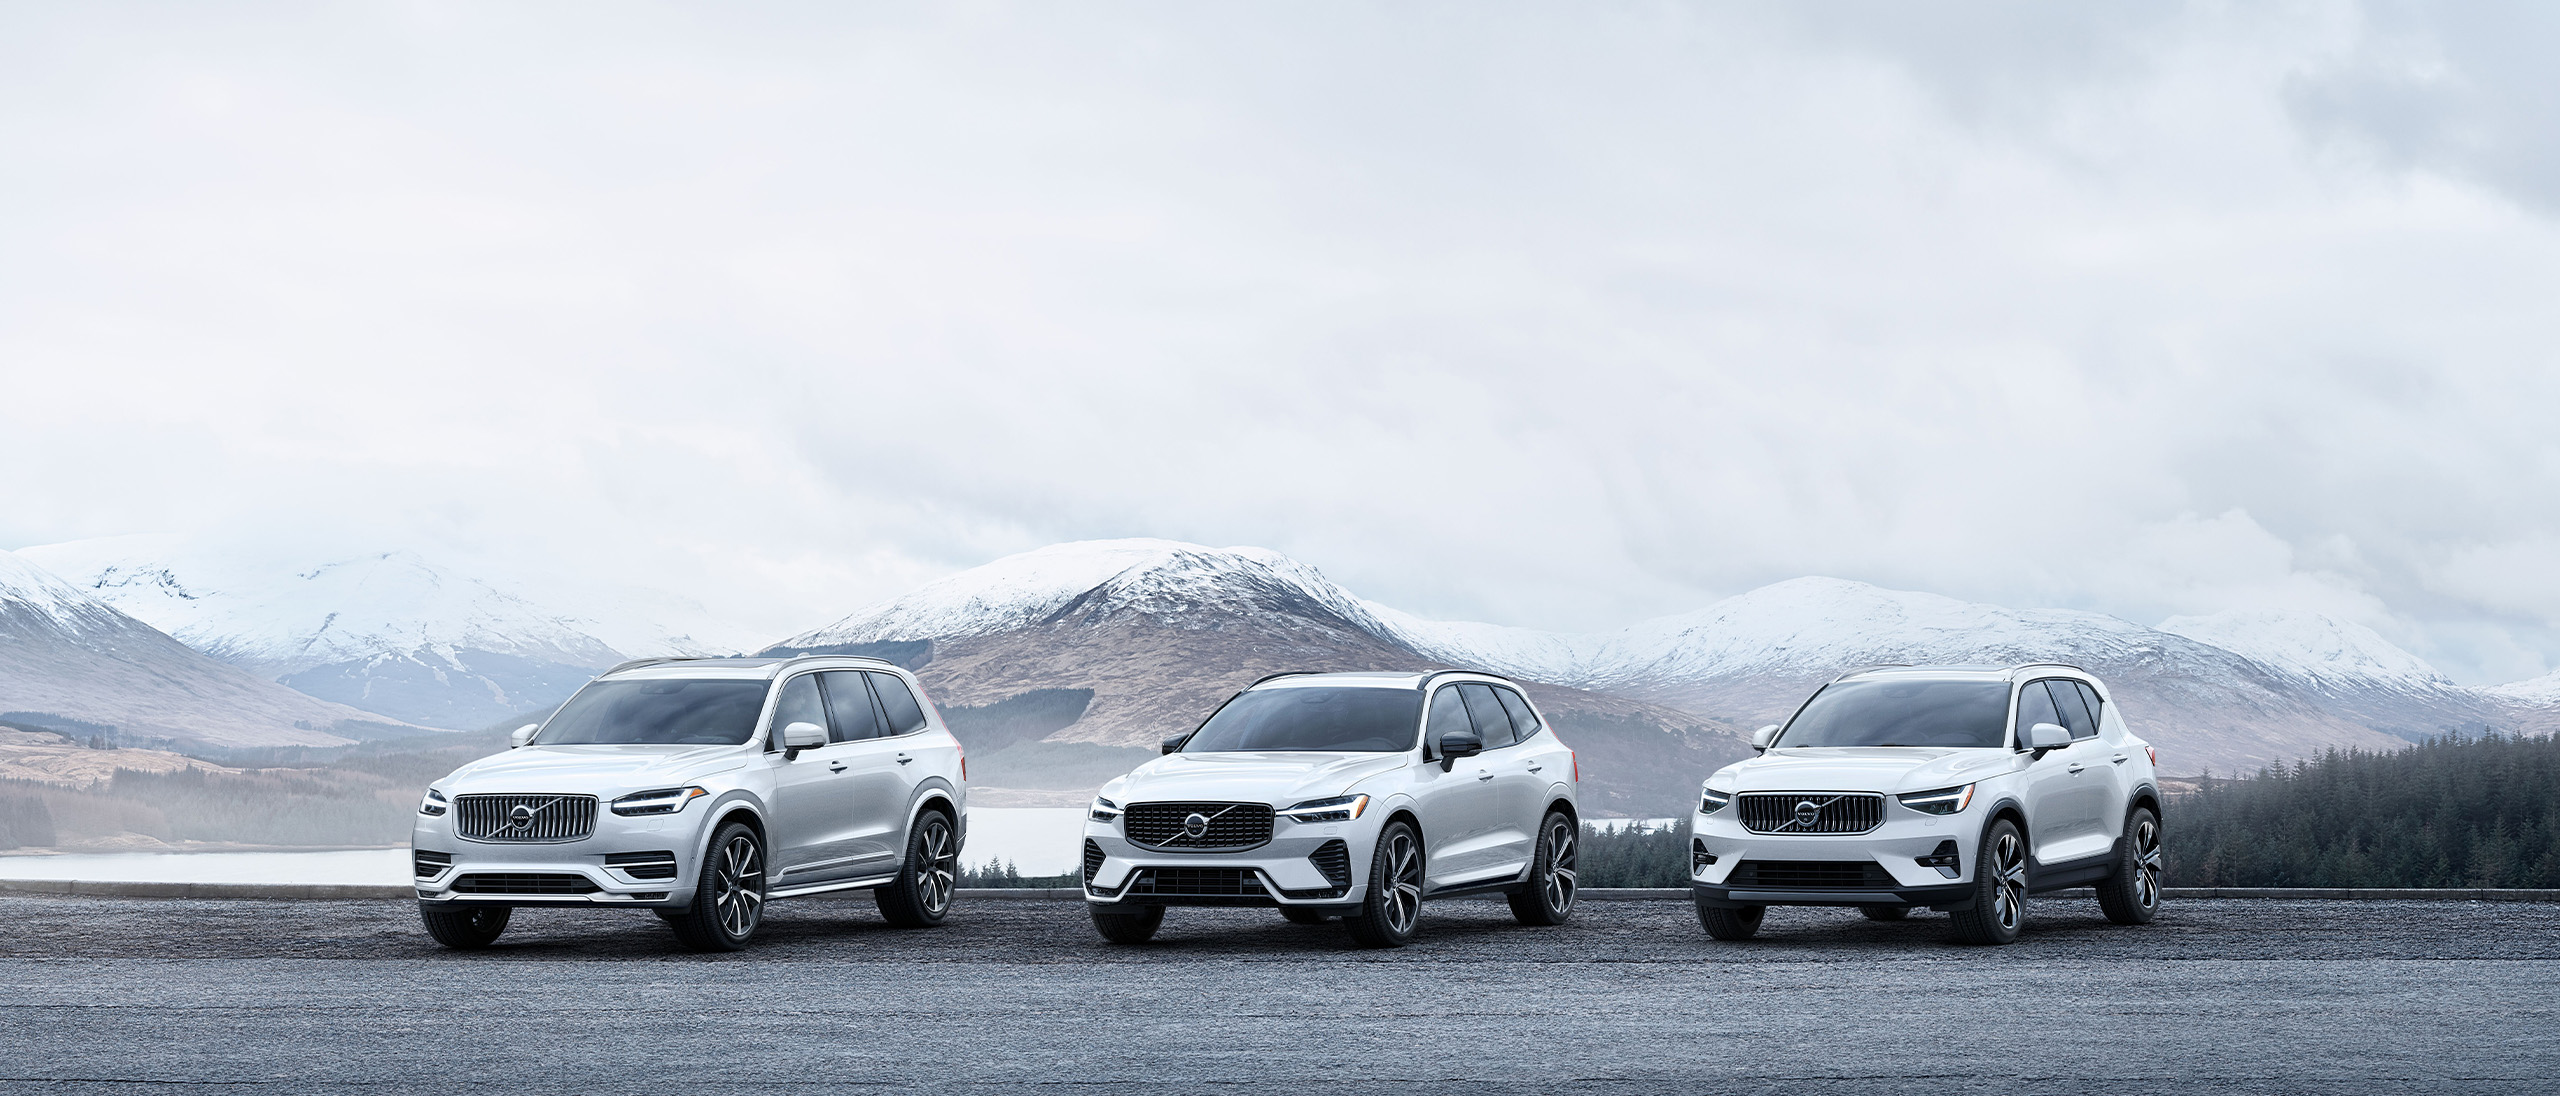 Volvo Mild Hybrid SUV Range parked in front of snowy mountains 